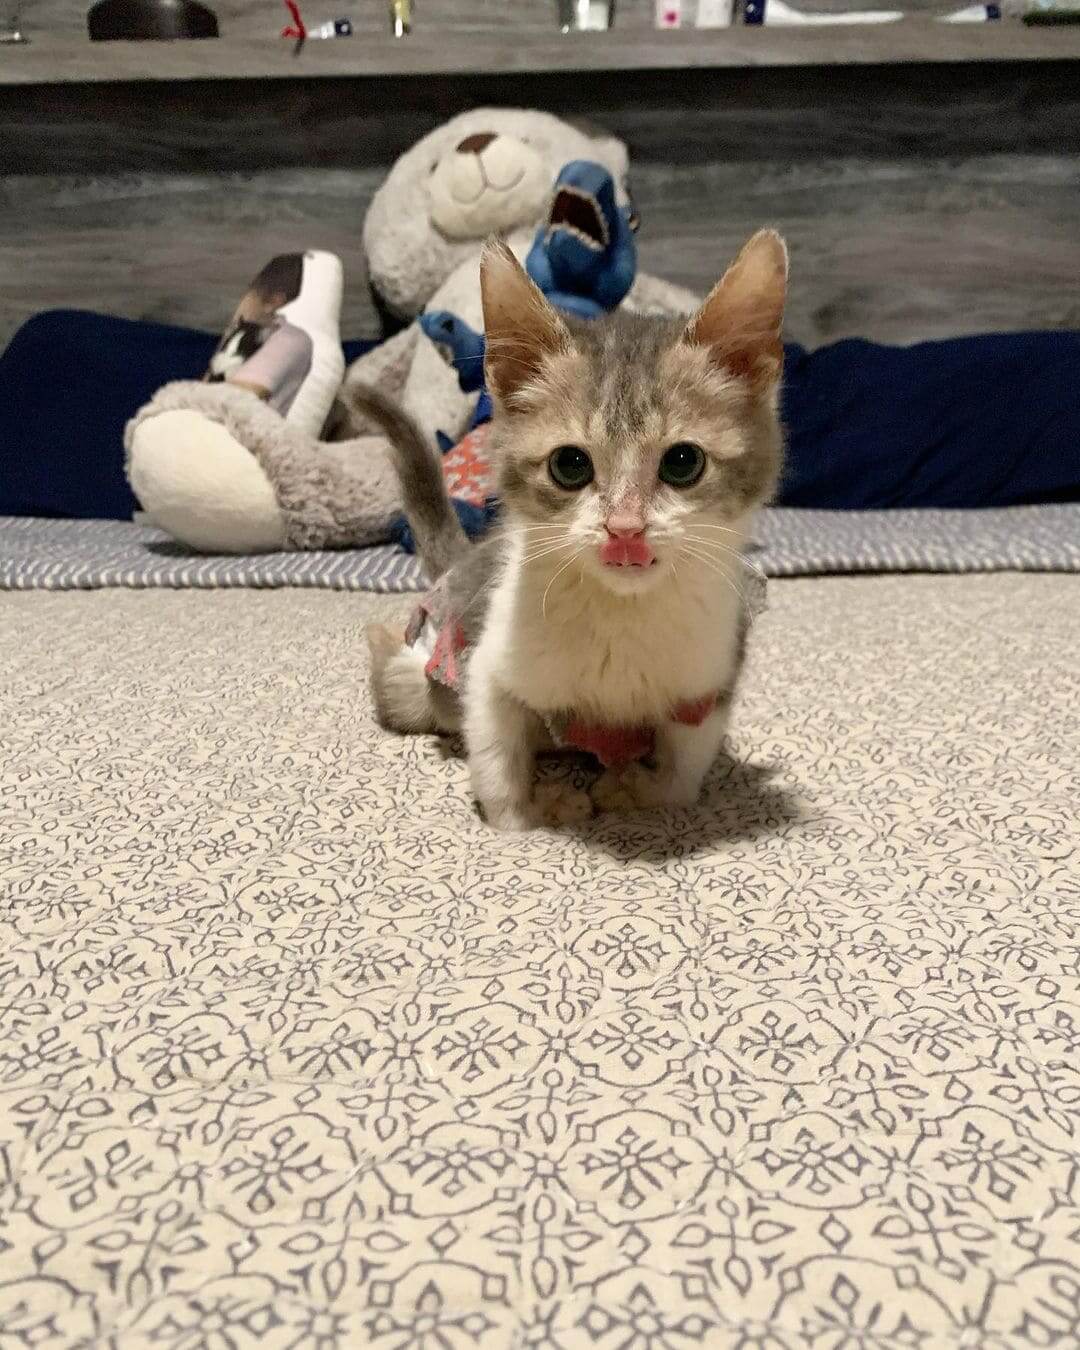 Paralyzed kitten wants everyone's attention